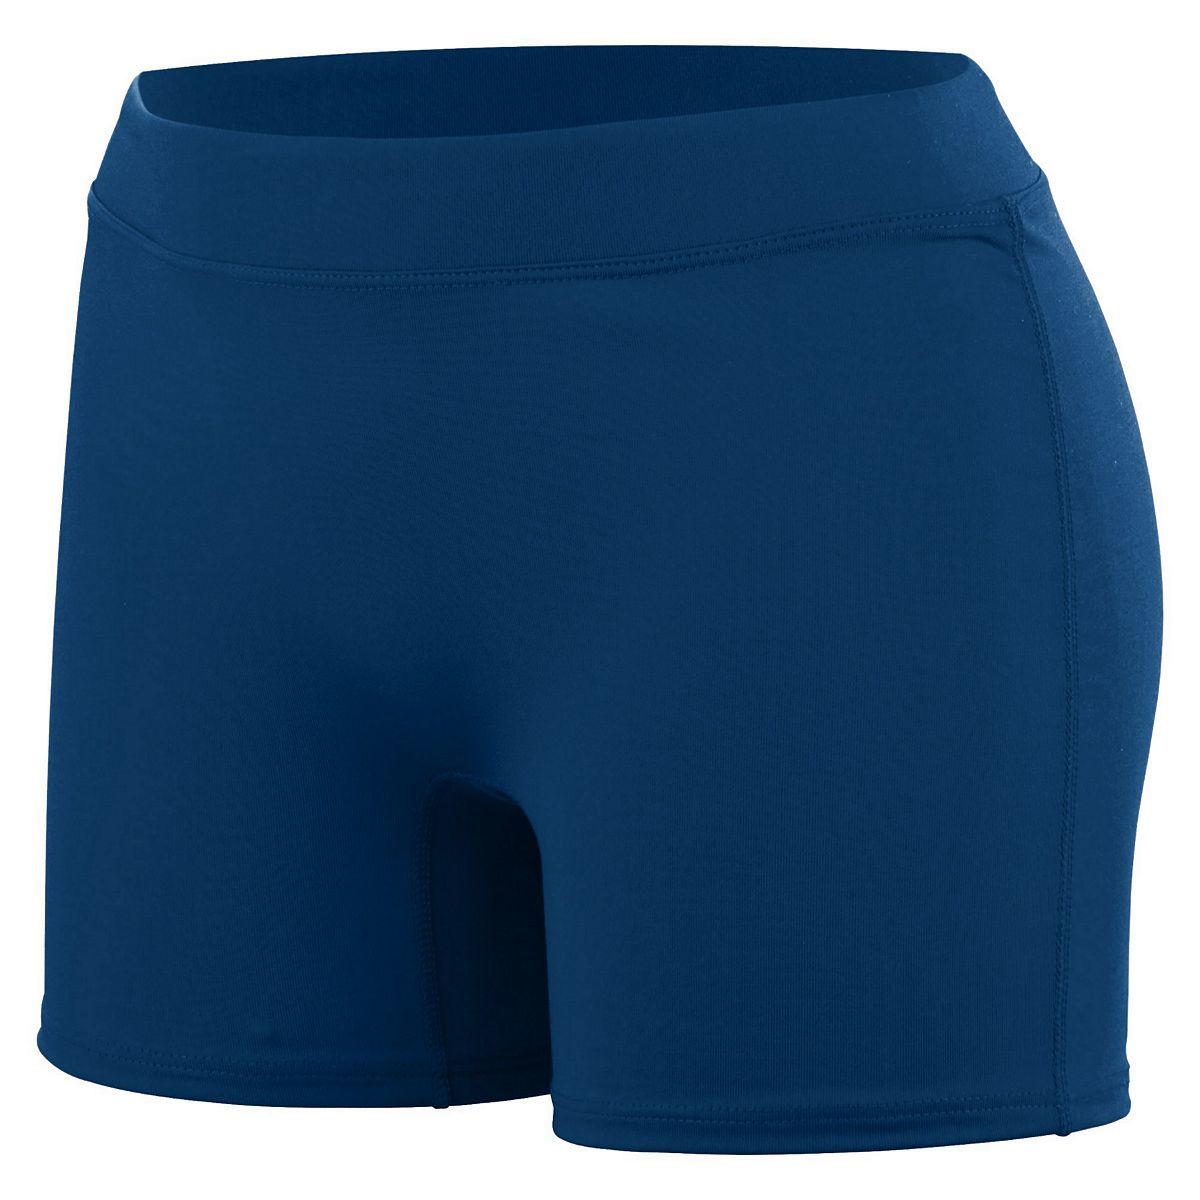 Ladies Knock Out Shorts - 345582